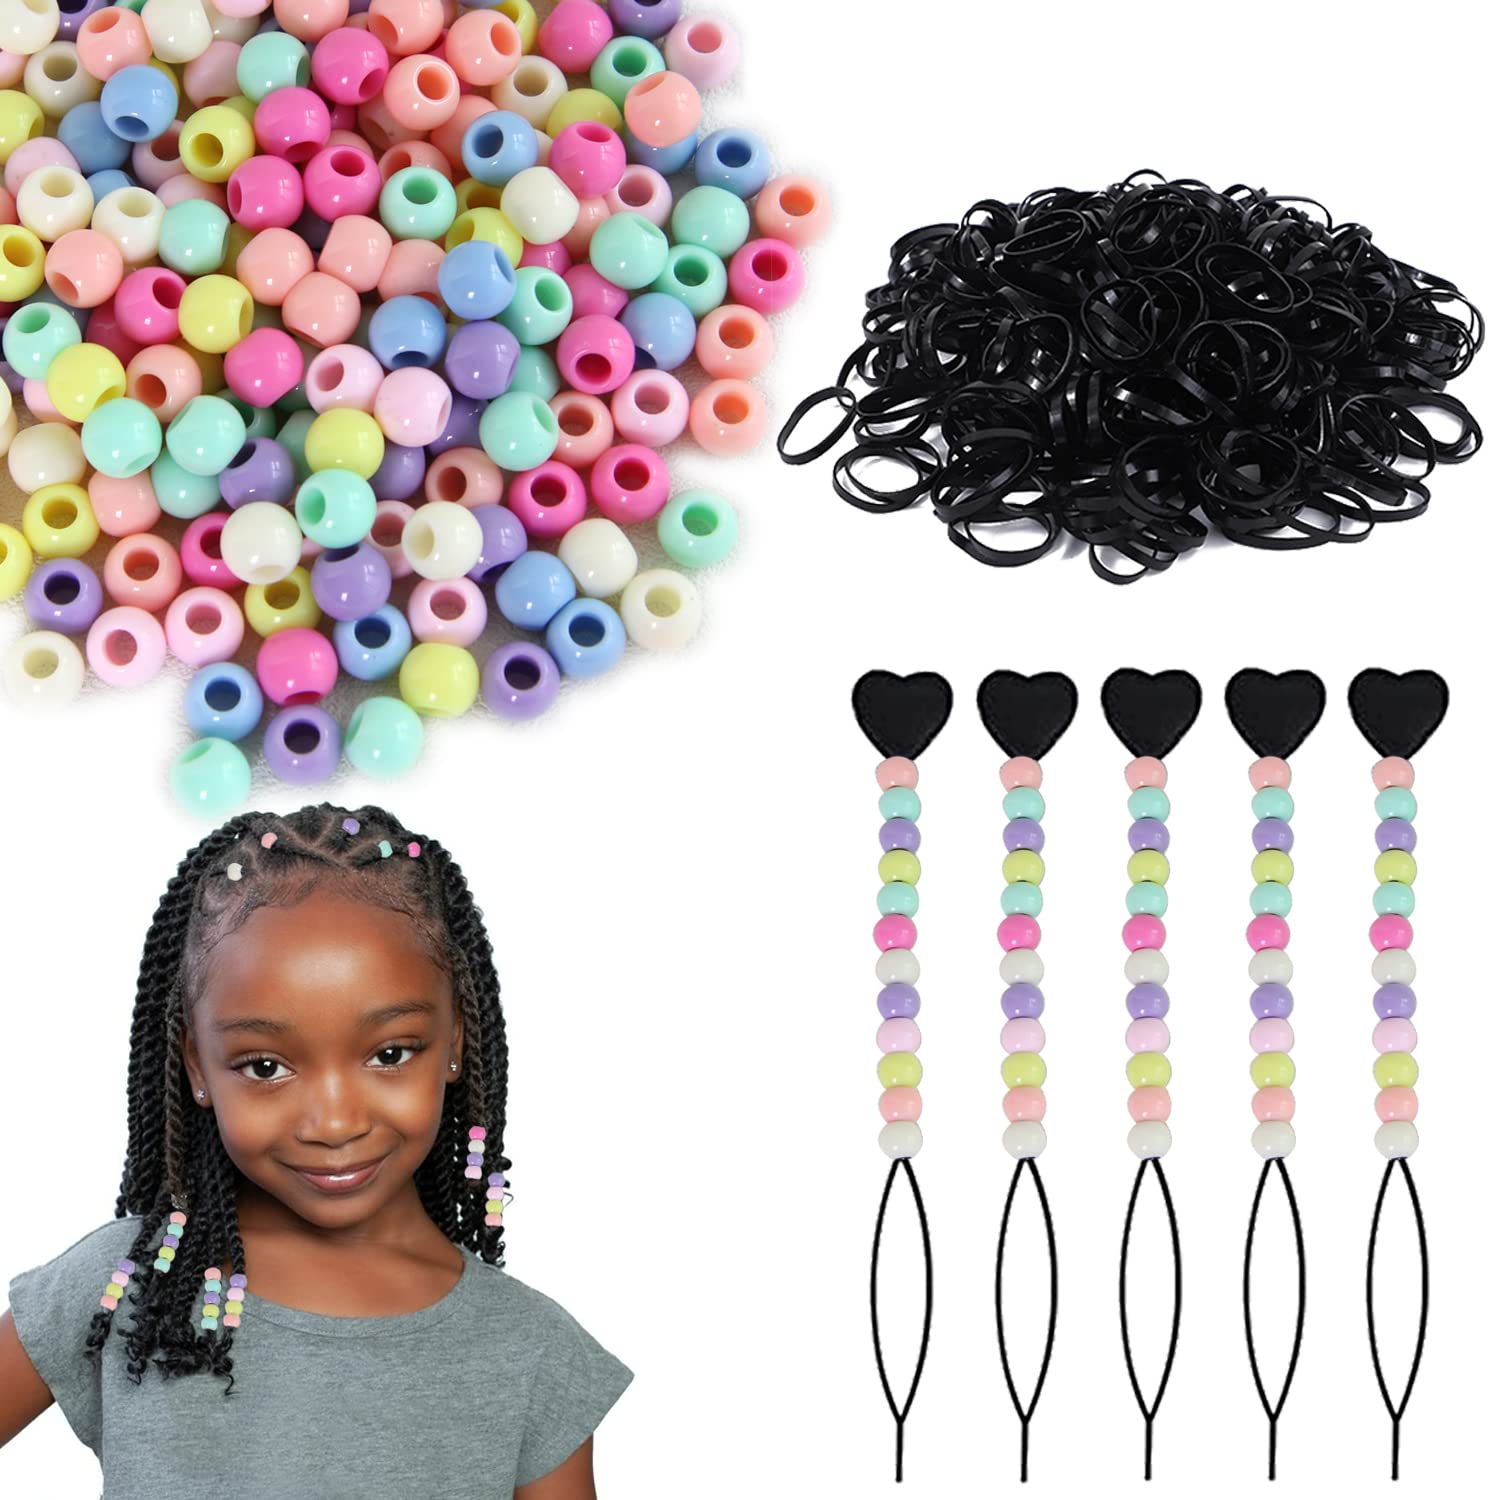  Expressions 24pc Ponytail Ball Hair Elastics  Collection,Brightly Colored Marble Finish Twin Bead Ponytail Balls For  Girls And Toddlers : Beauty & Personal Care